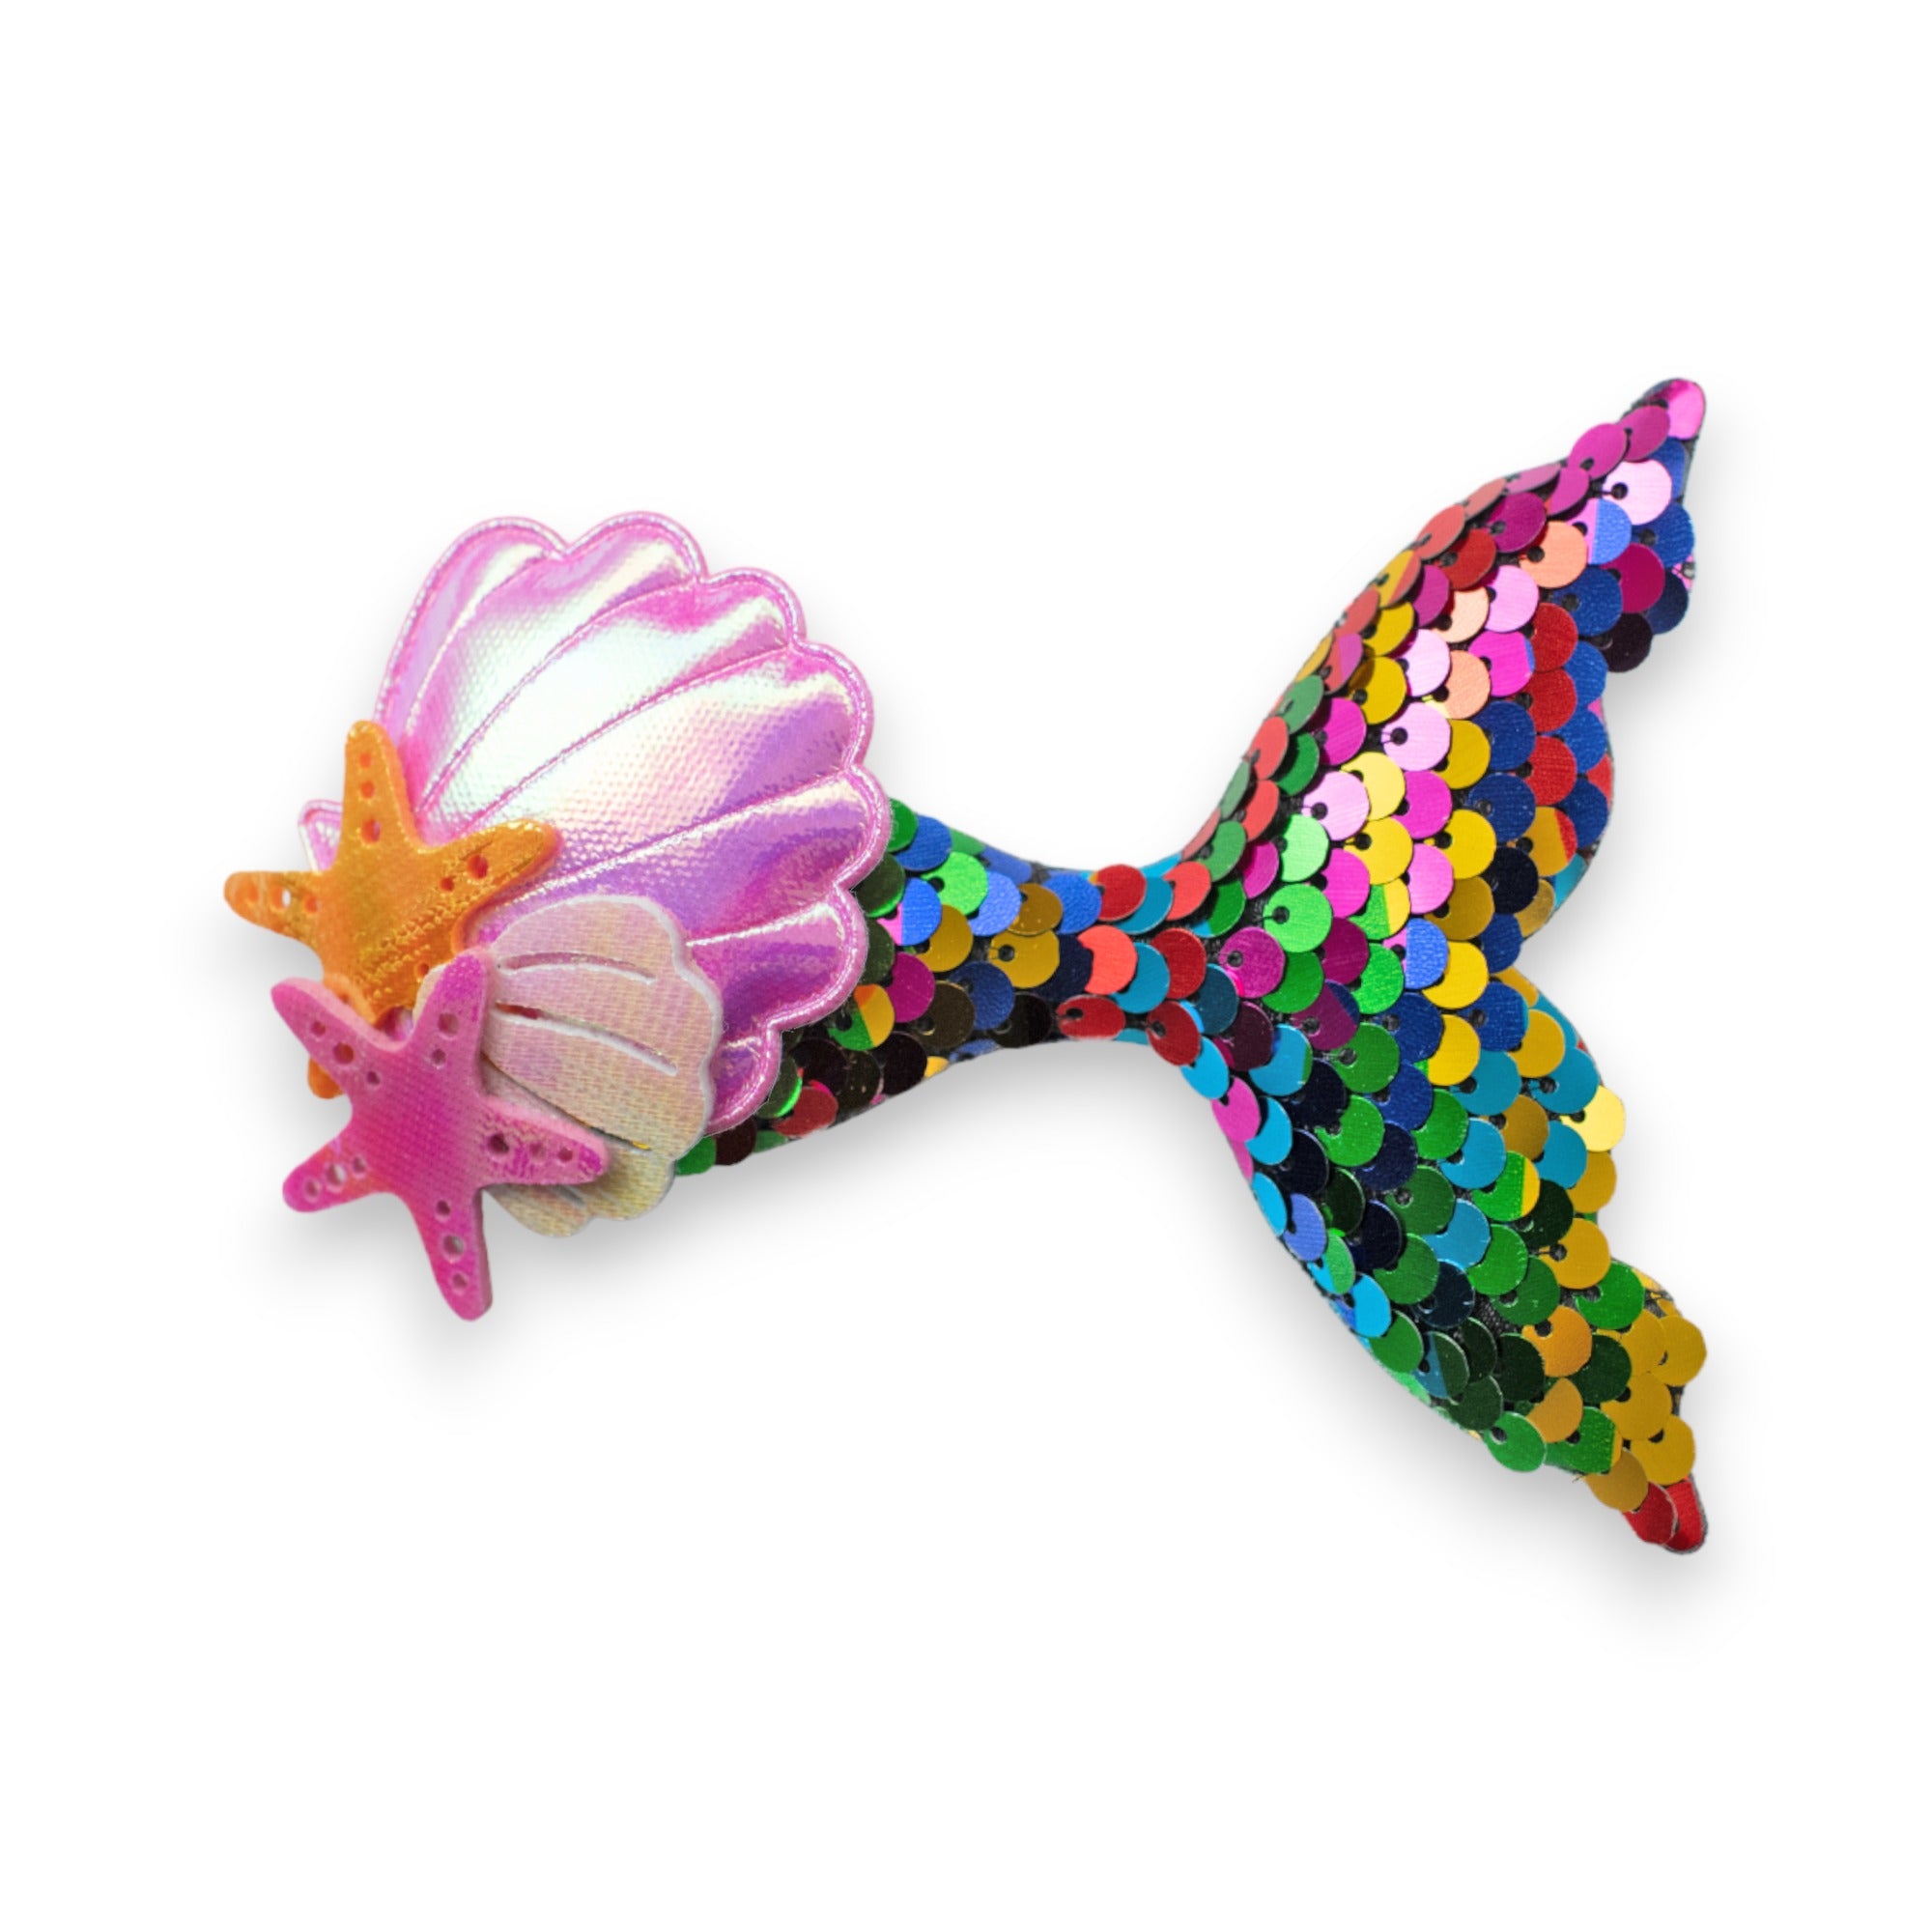 Summer Crystal Sparkling Sequins Mermaid Tail with Starry Shell Hair Clip For Girls - Stylish Alligator Hair Accessory